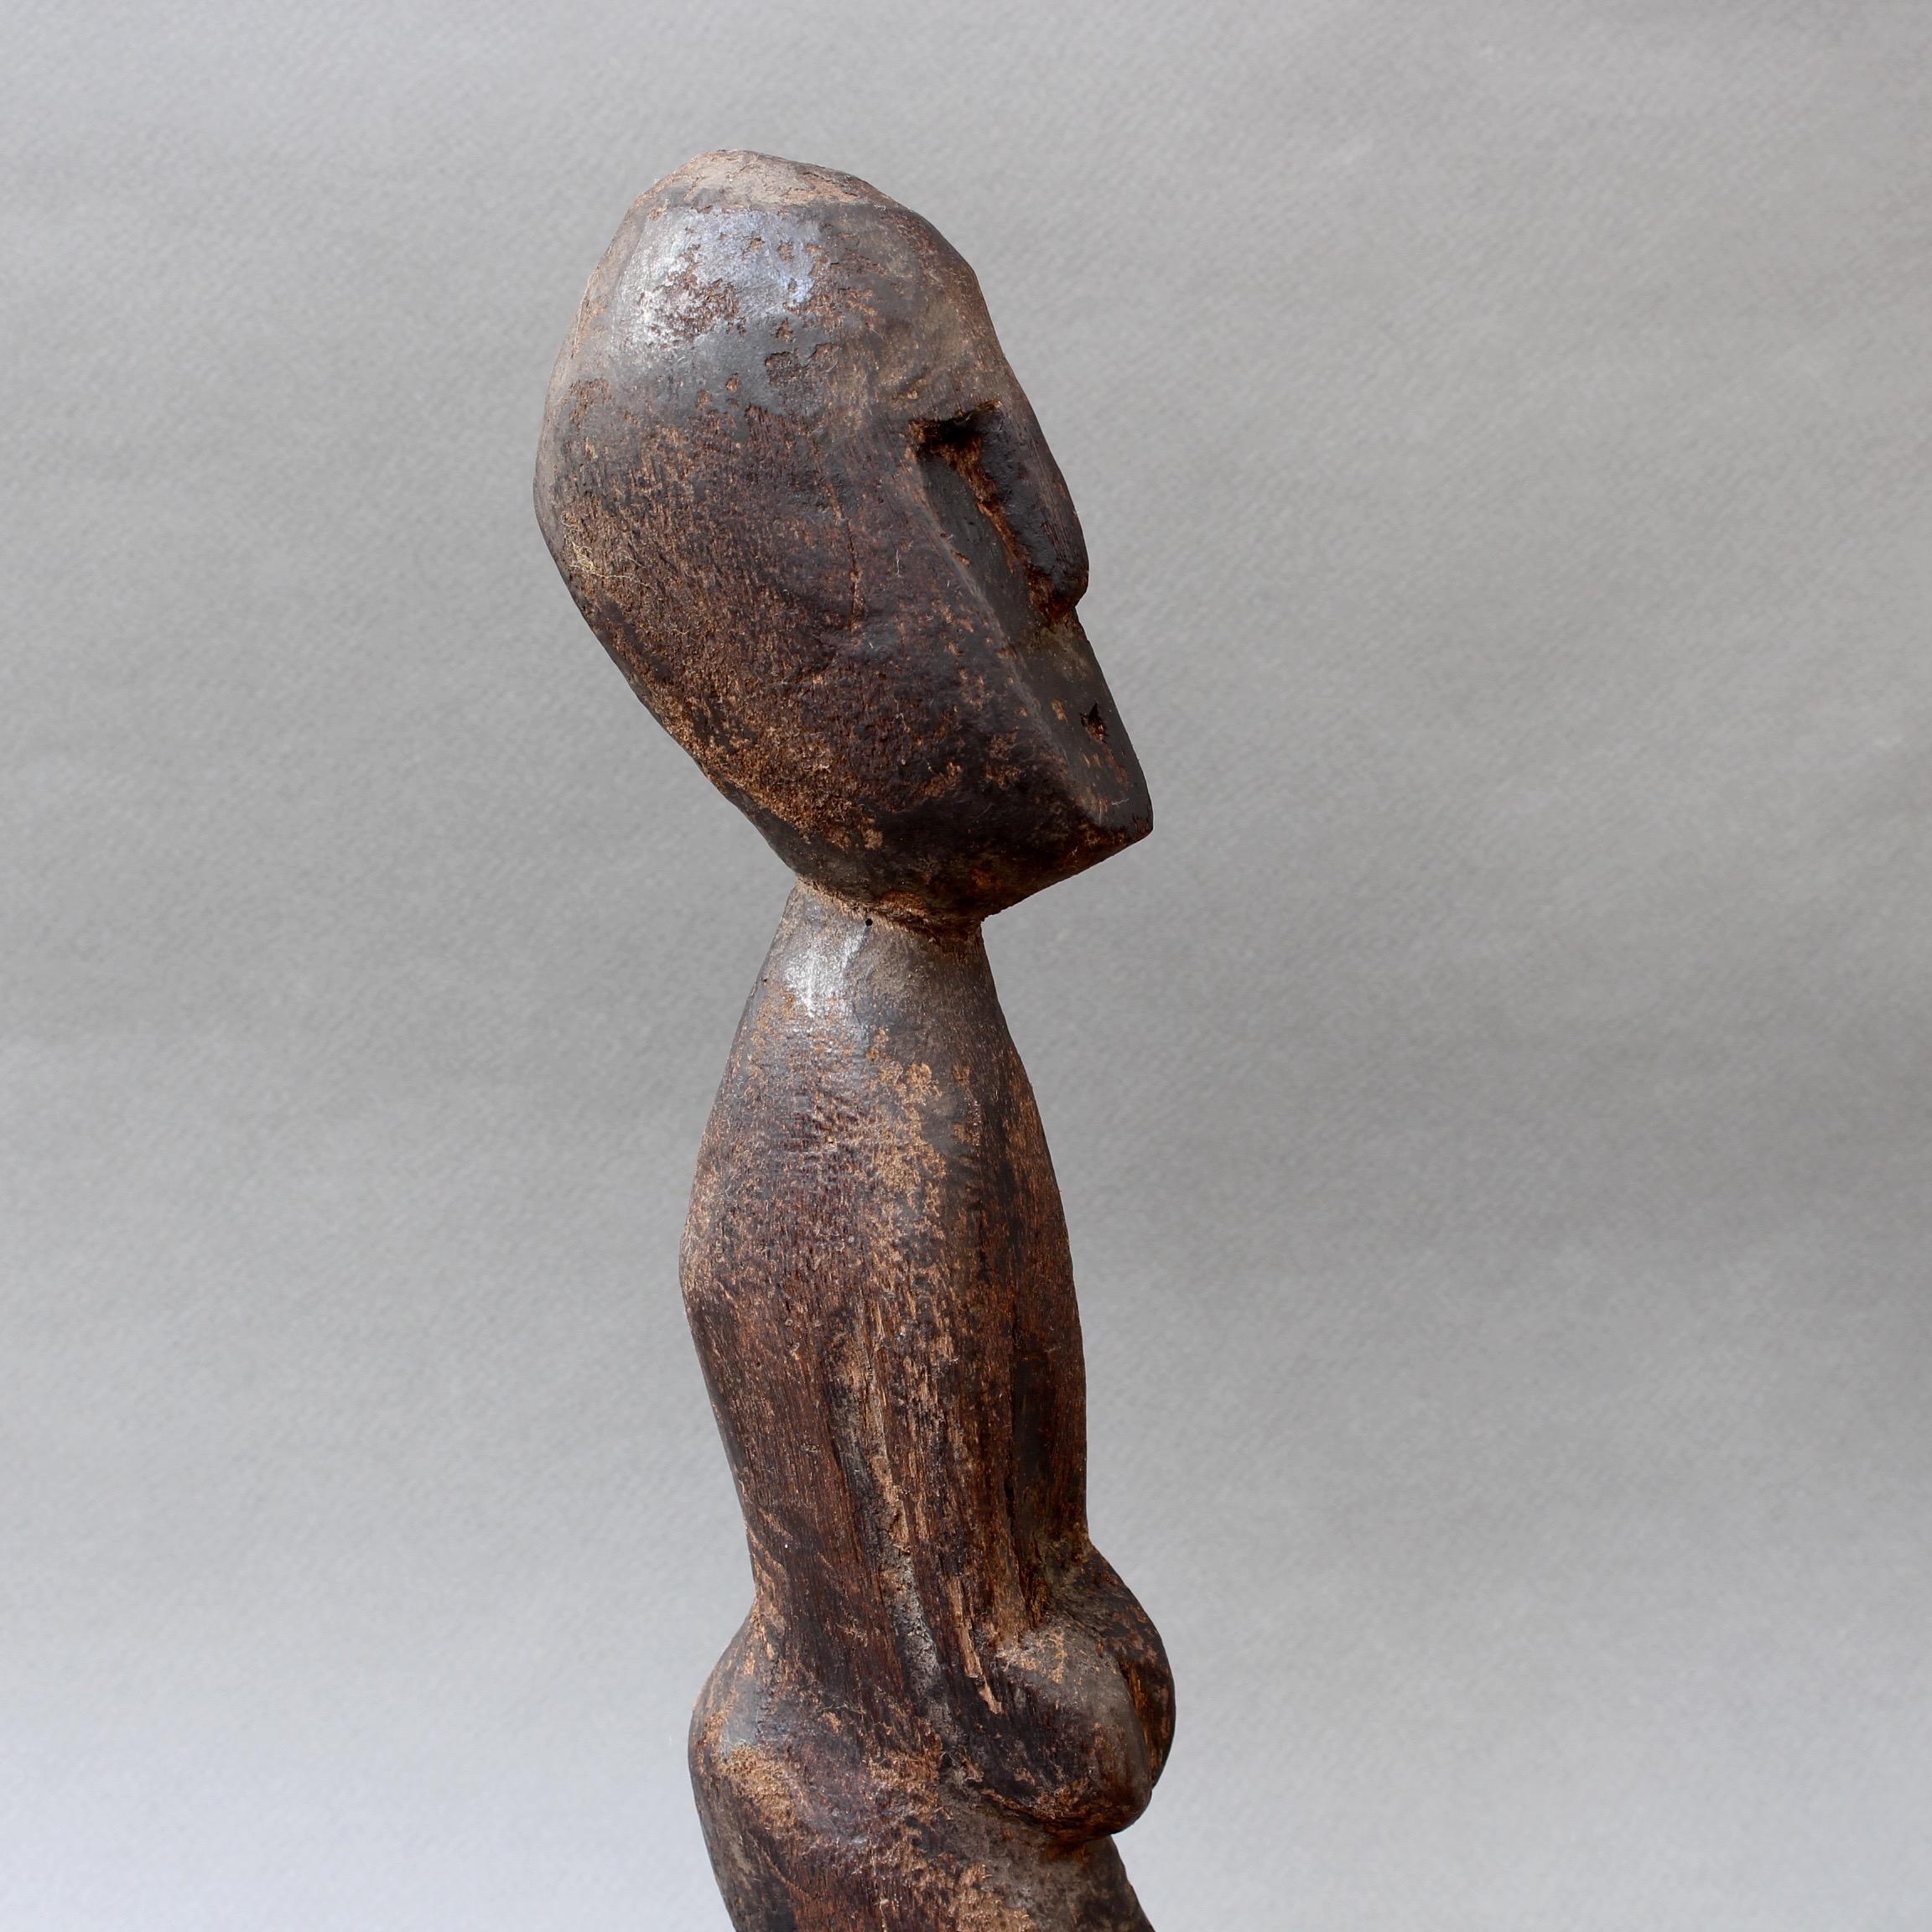 Wooden Carving / Sculpture of Kneeling Wooden Figure from Timor, Indonesia 2